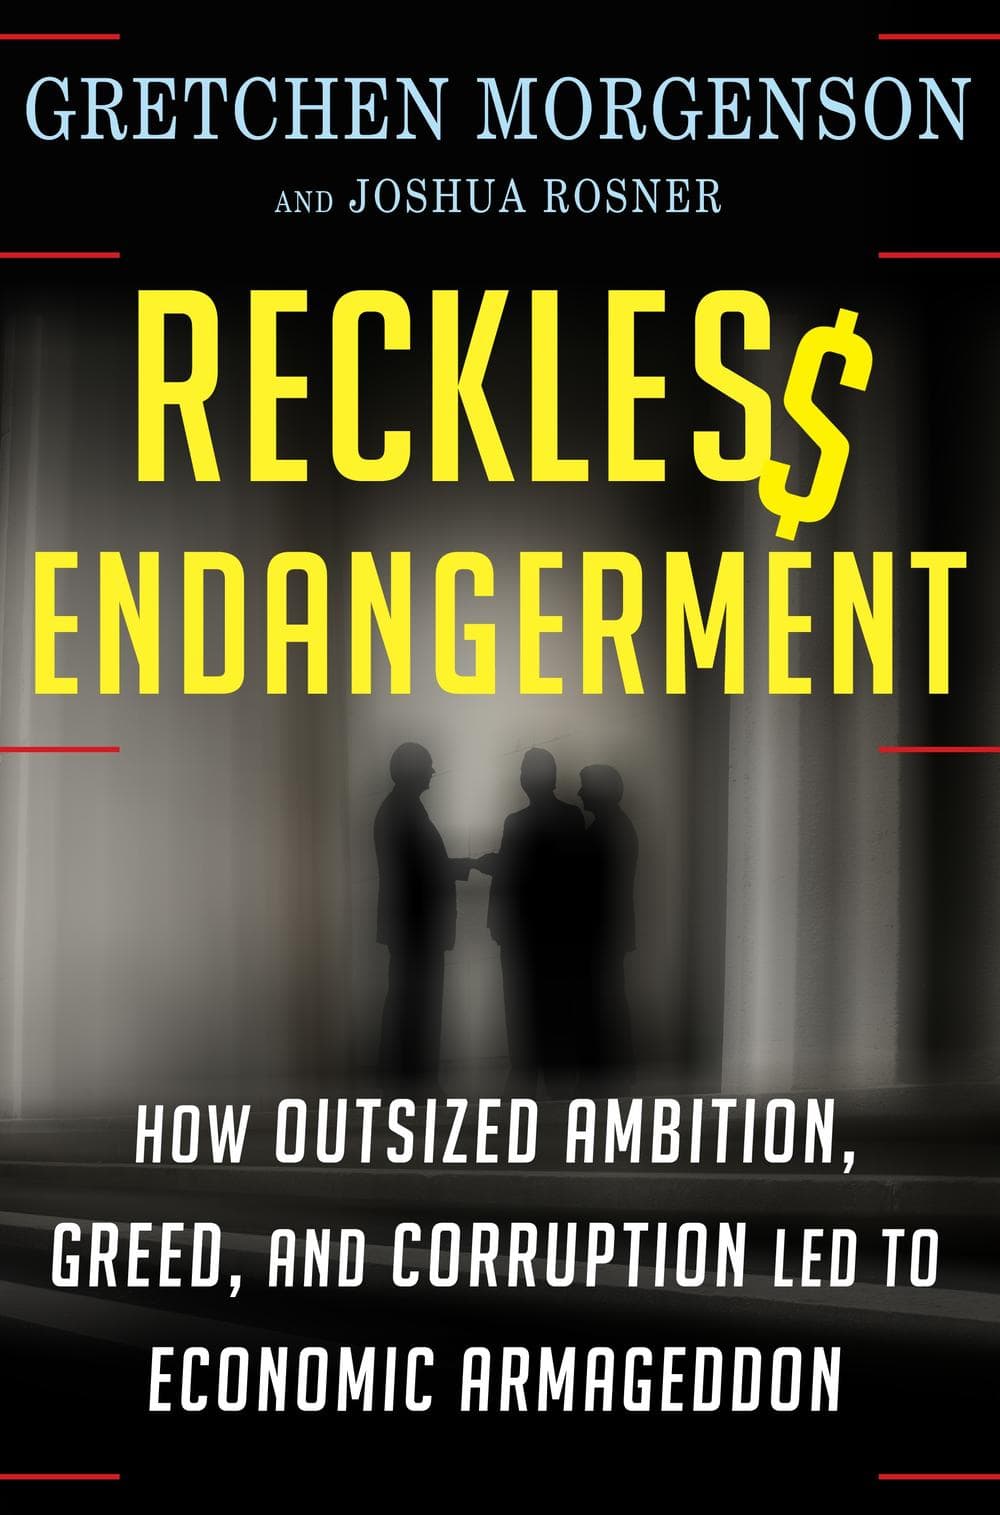 Cover of 'Reckless Endangerment' (Photo Courtesy of Time Books)